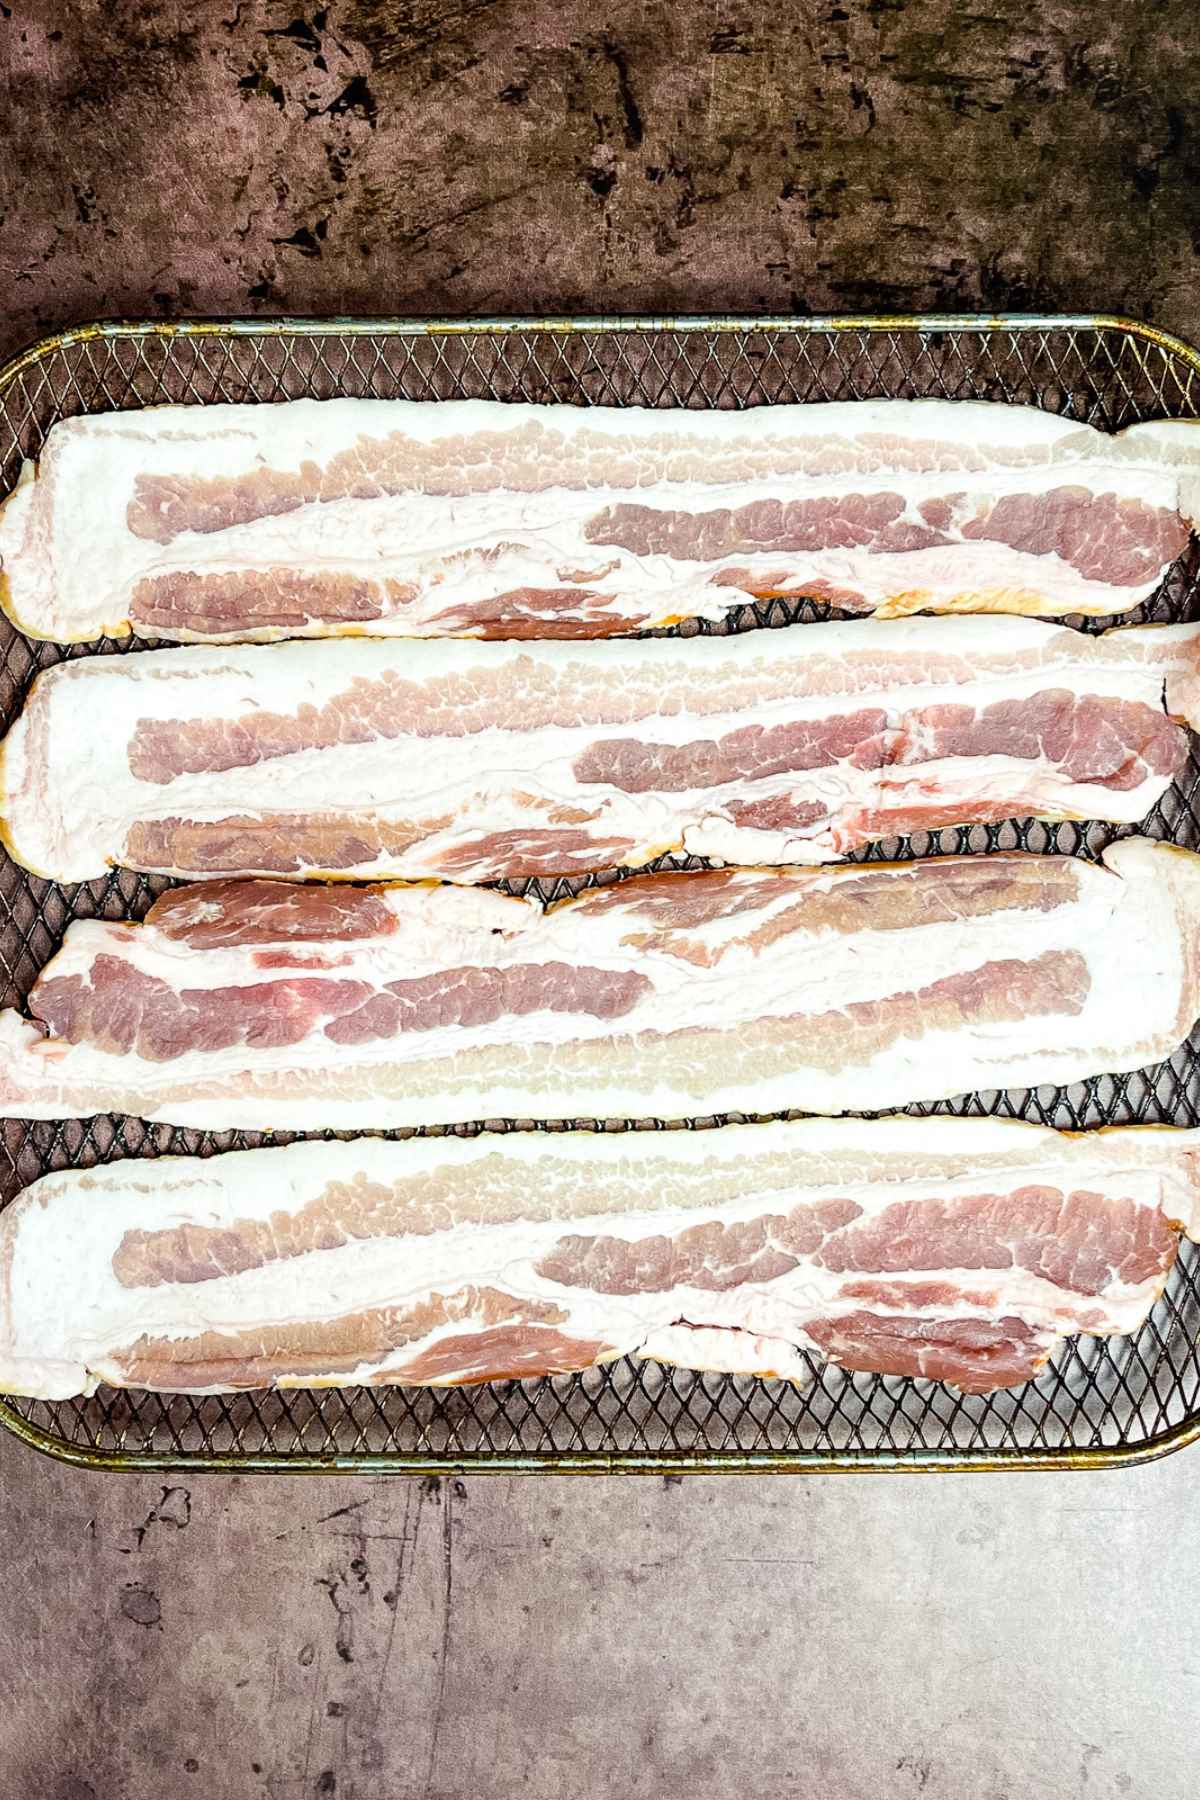 Raw bacon slices on air fryer tray.